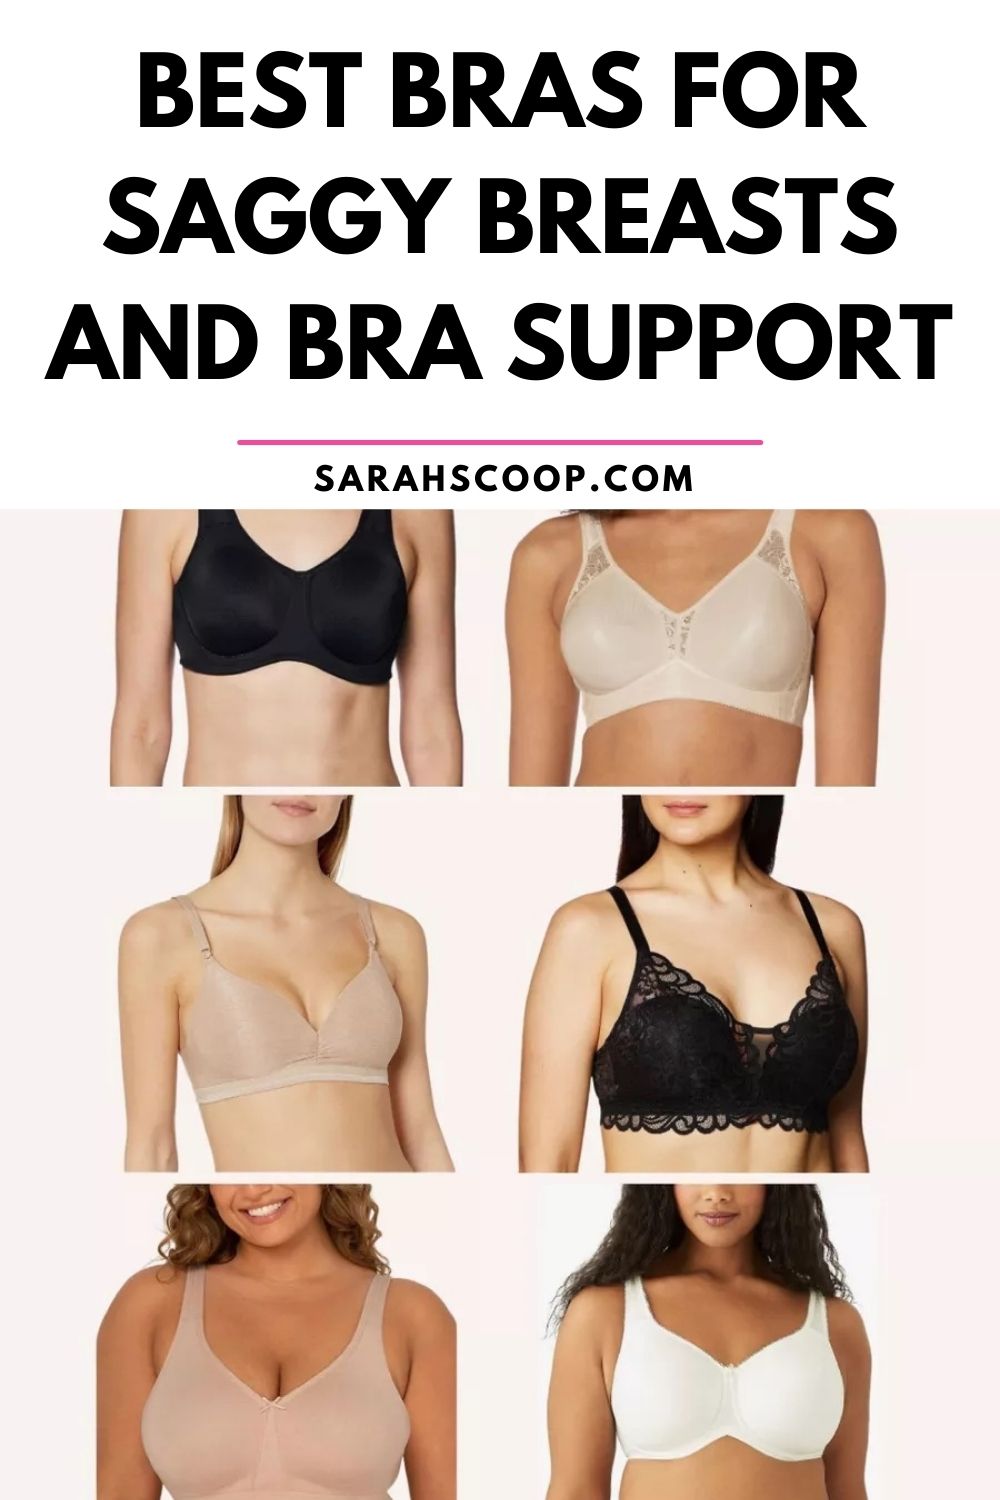 Best of Breast picture with bra